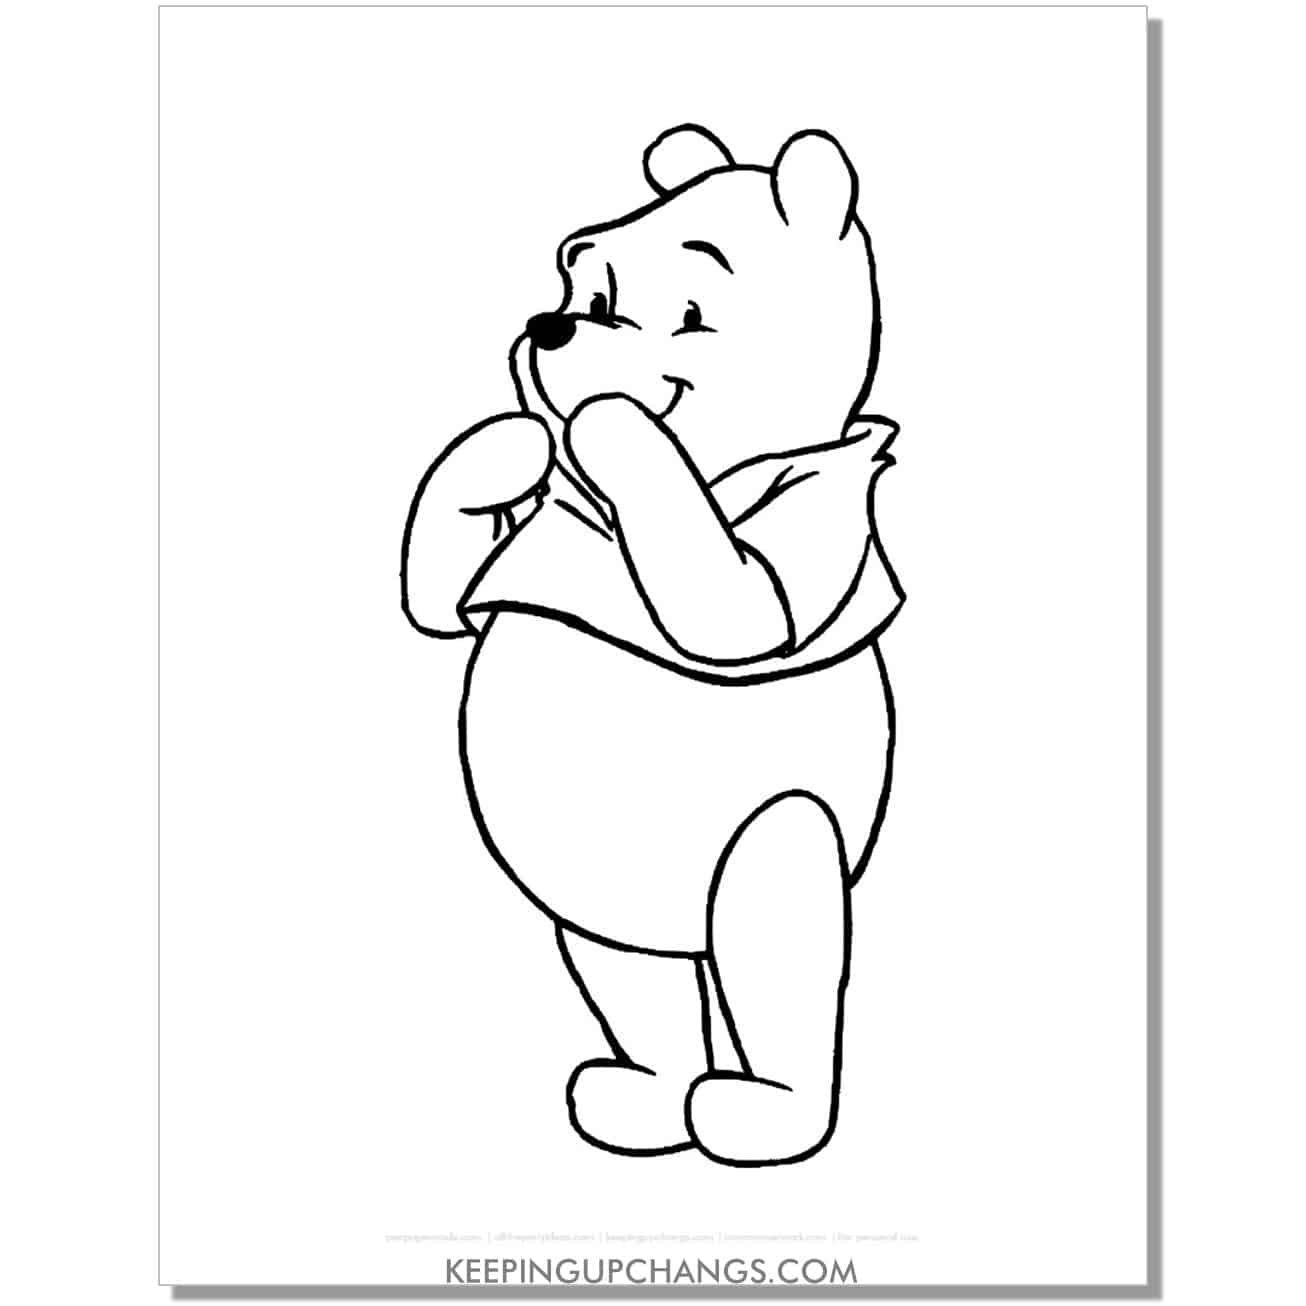 winnie the pooh giggling coloring page, sheet.